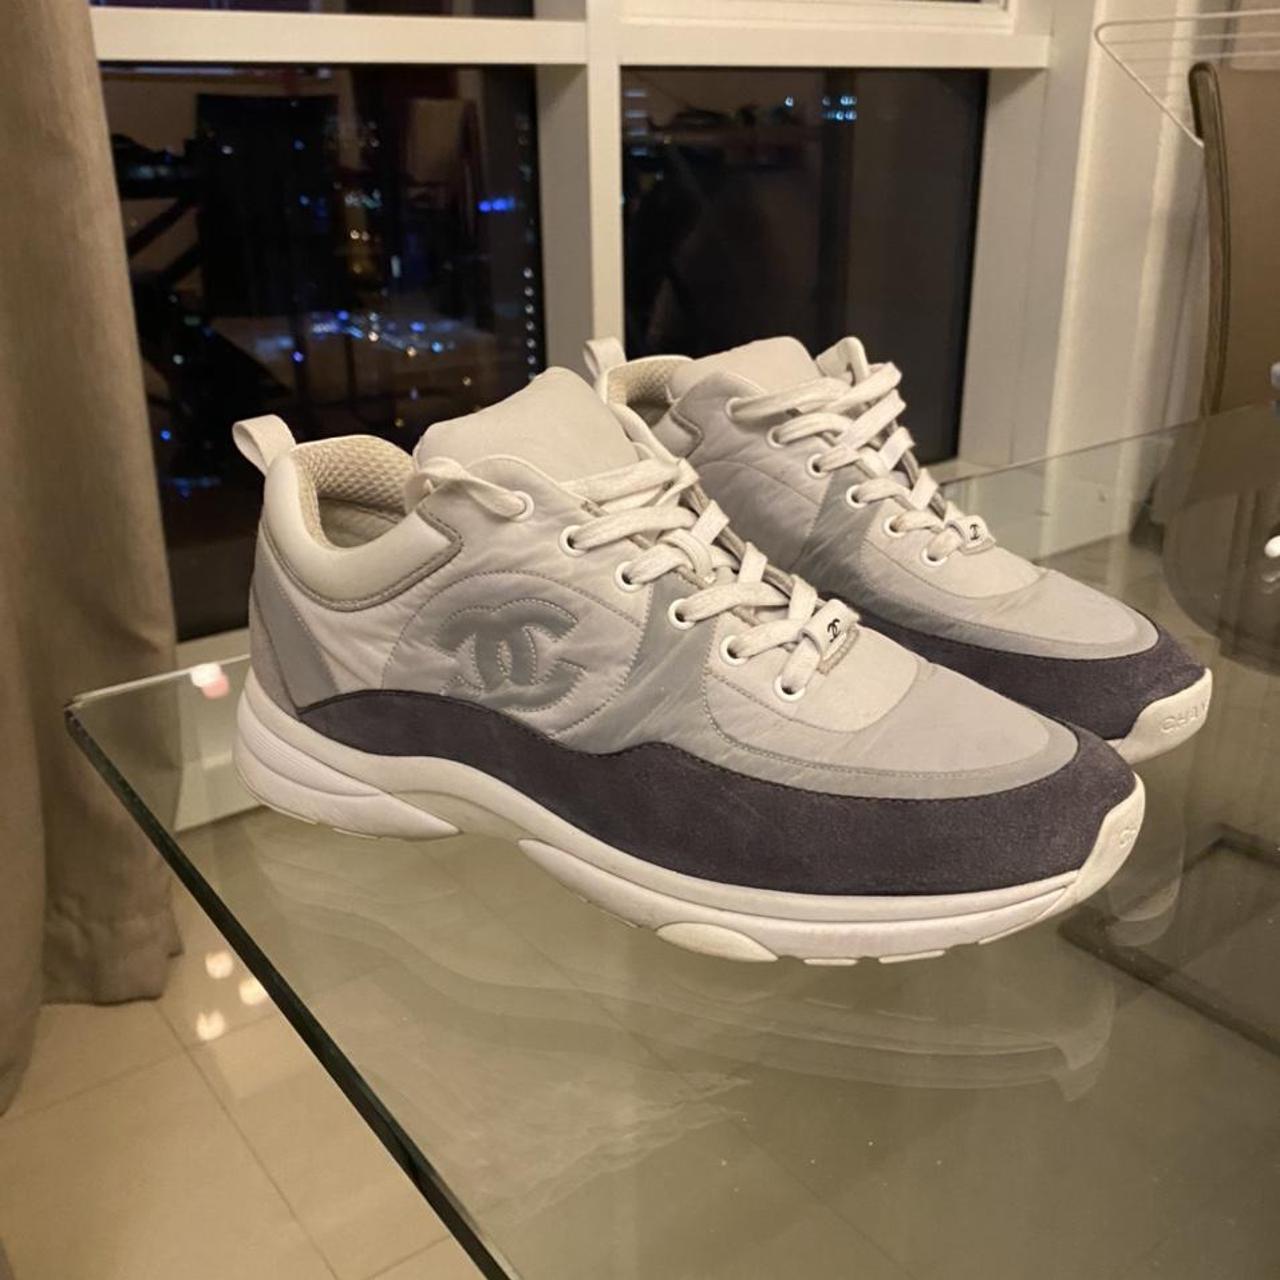 Authentic Rare Chanel trainers , Sold out everywhere